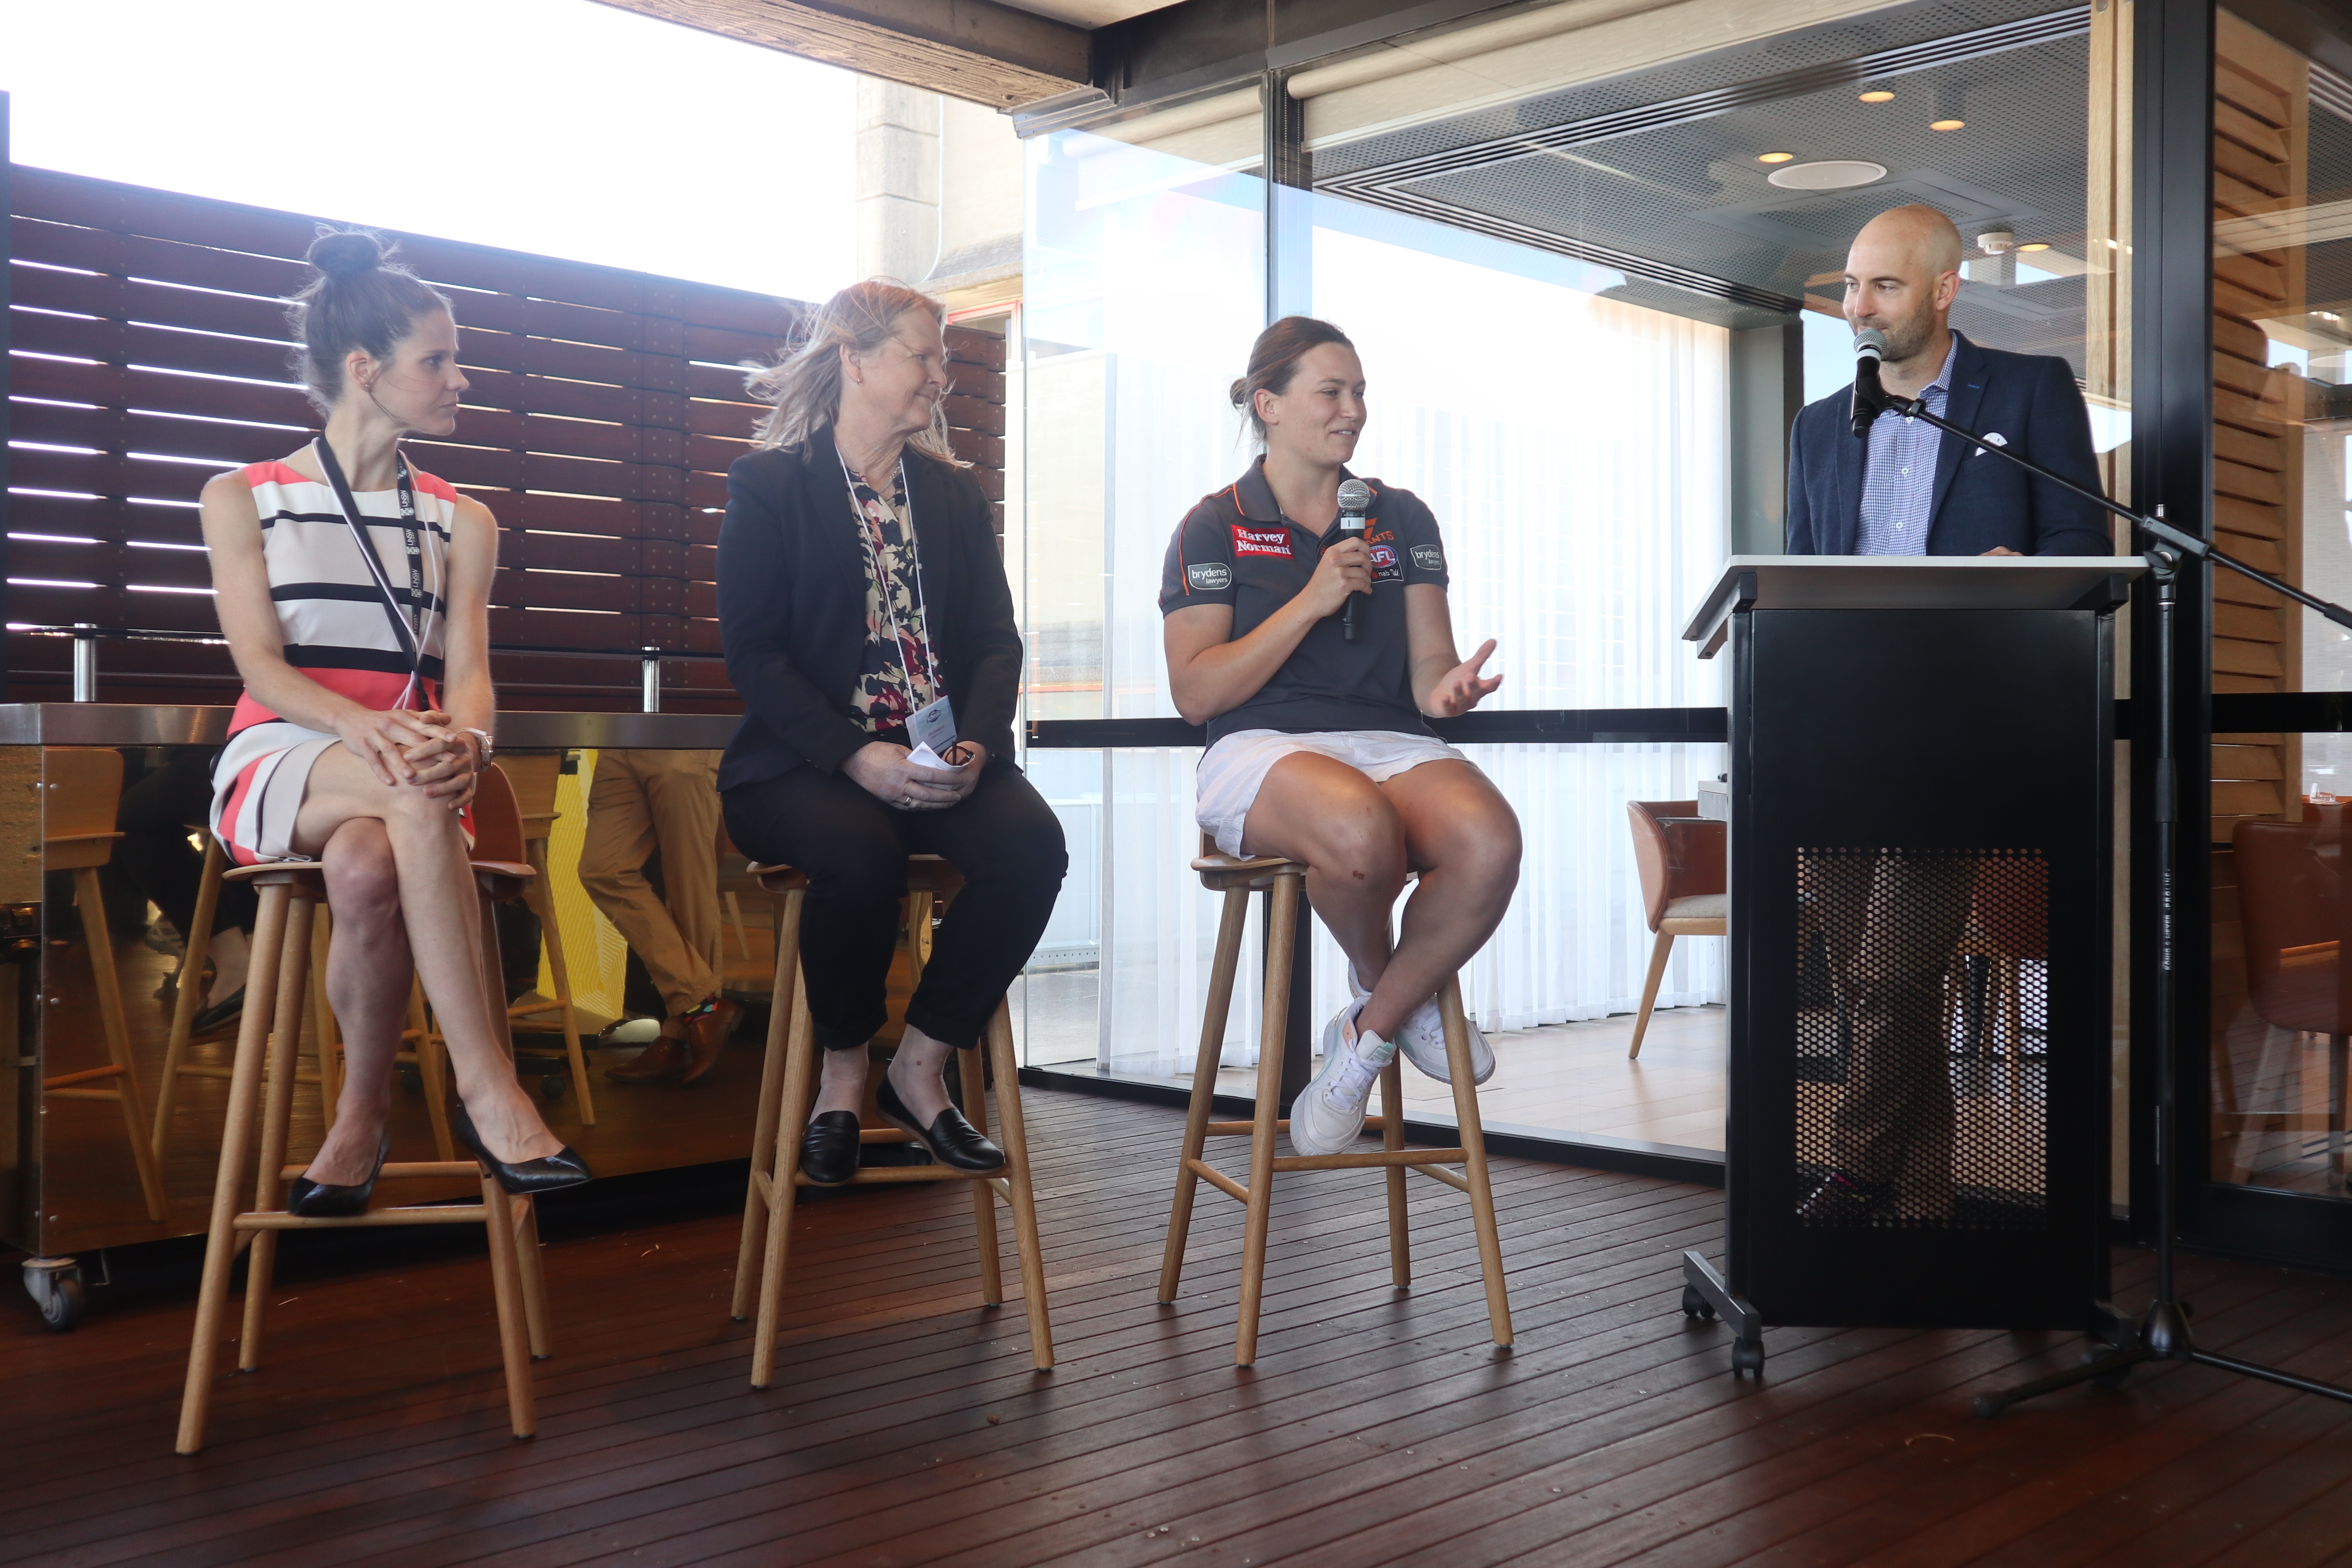 A panel of experts (L-R) Dr Helena Granziera, UNSW; Kim Hawgood, Kimberlin Education; Alyce Parker, GWS Giants discussed the impact the AFL Schools Strategy will have